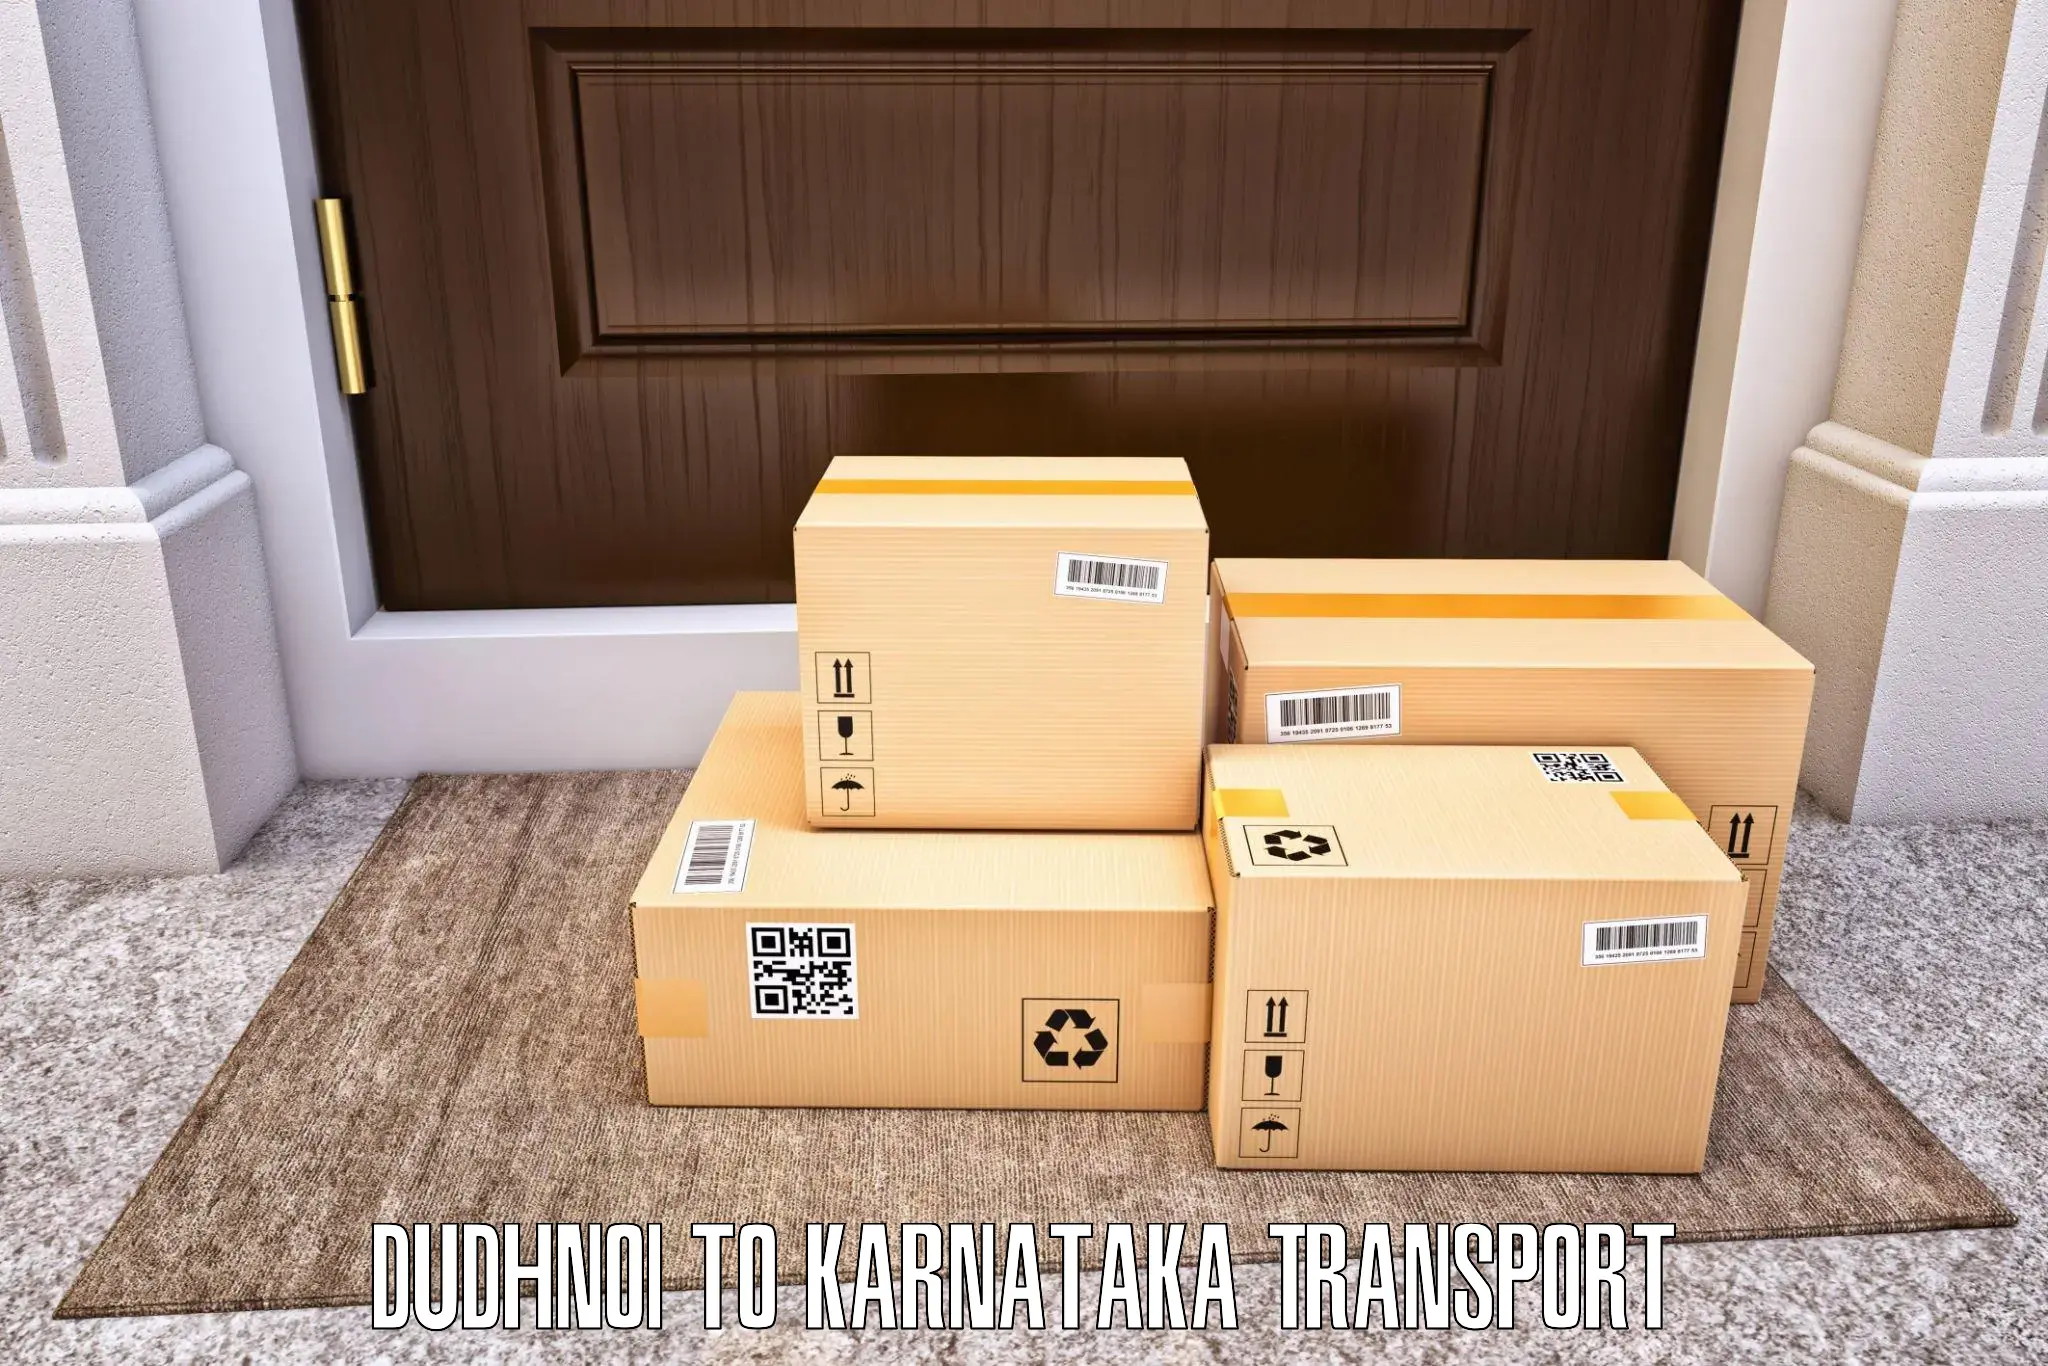 Road transport online services in Dudhnoi to Hoskote